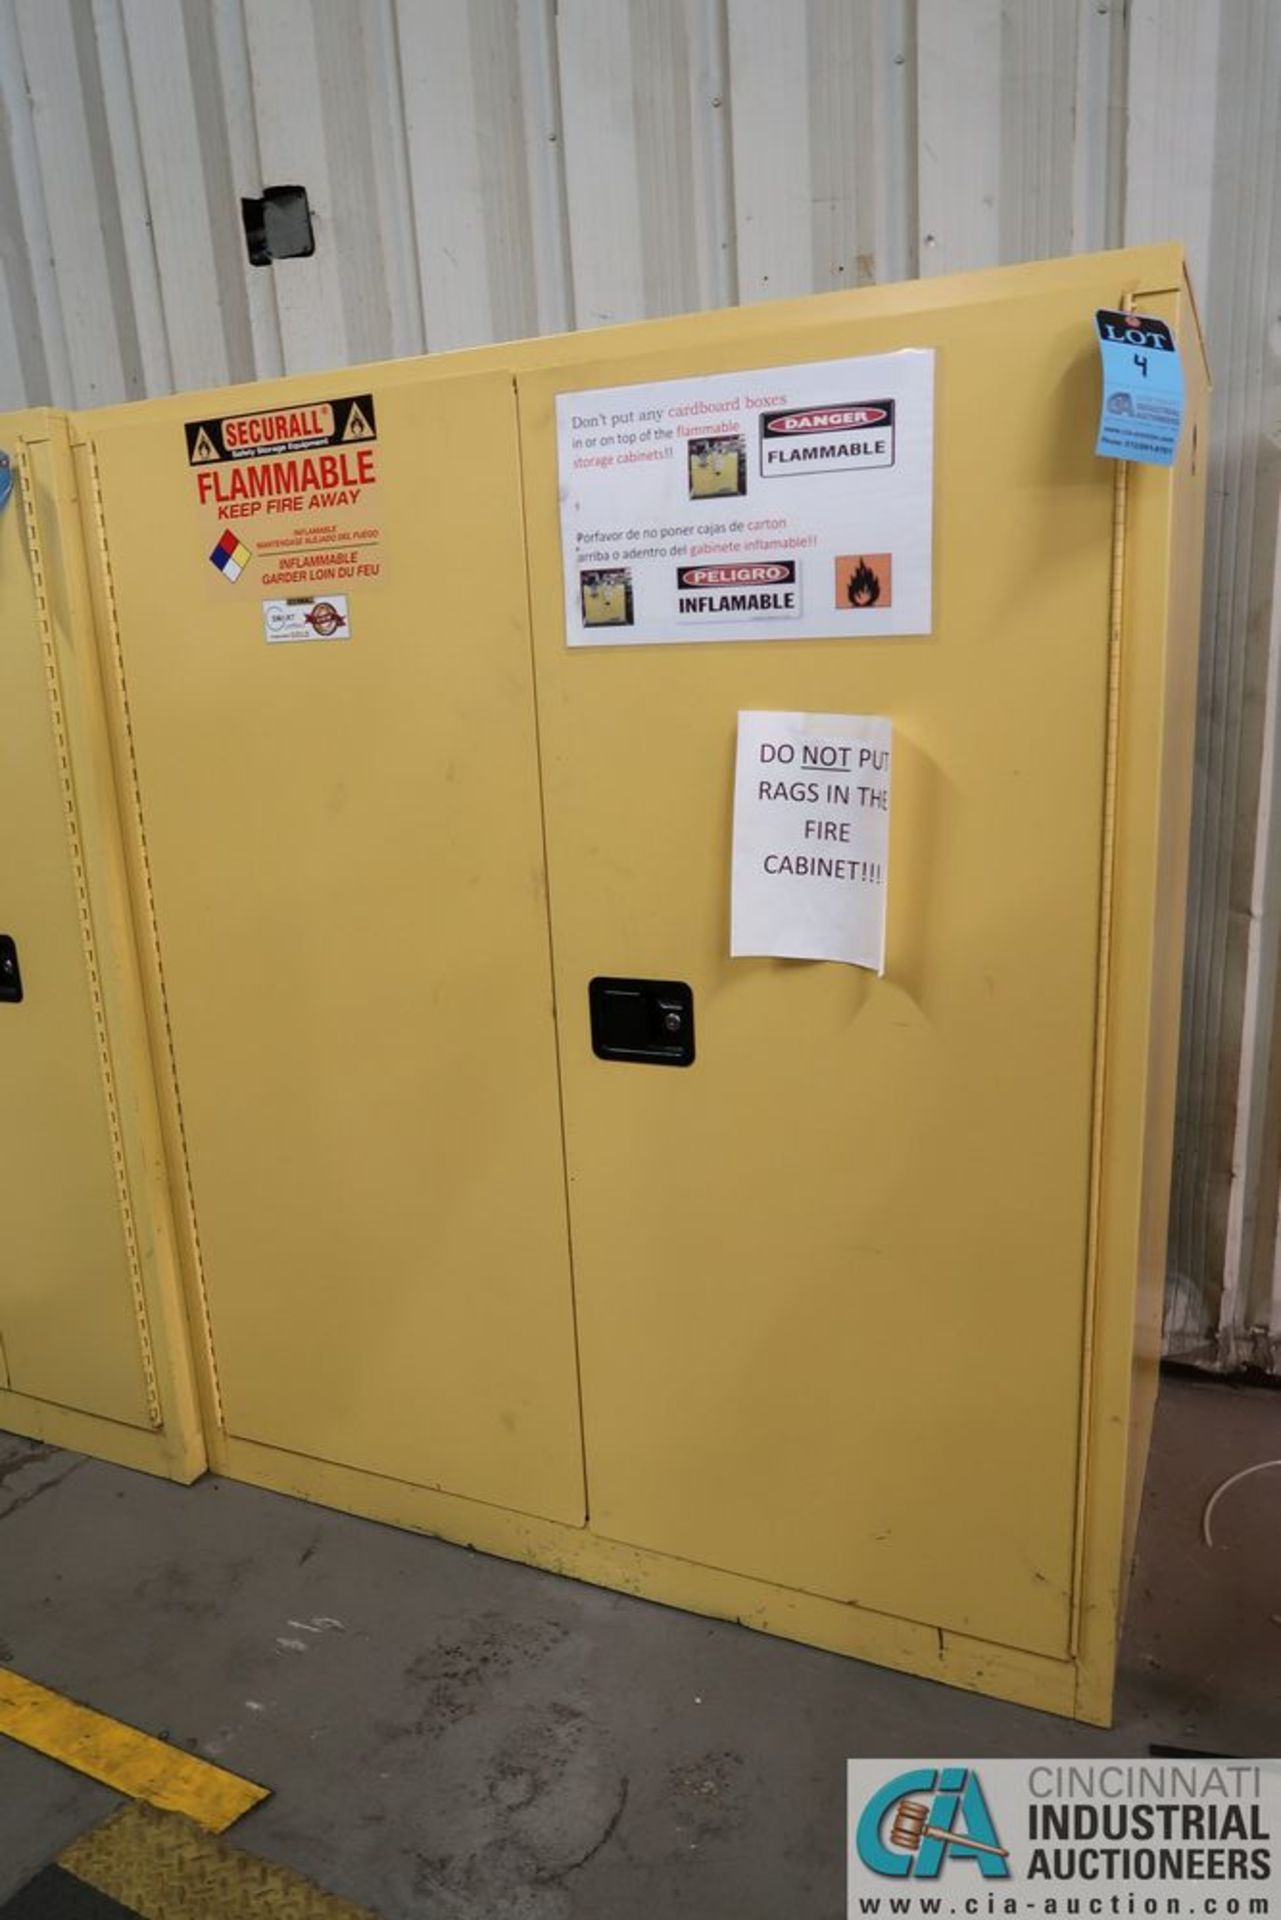 120 GALLON SECURALL FLAMMABLE SAFETY CABINET